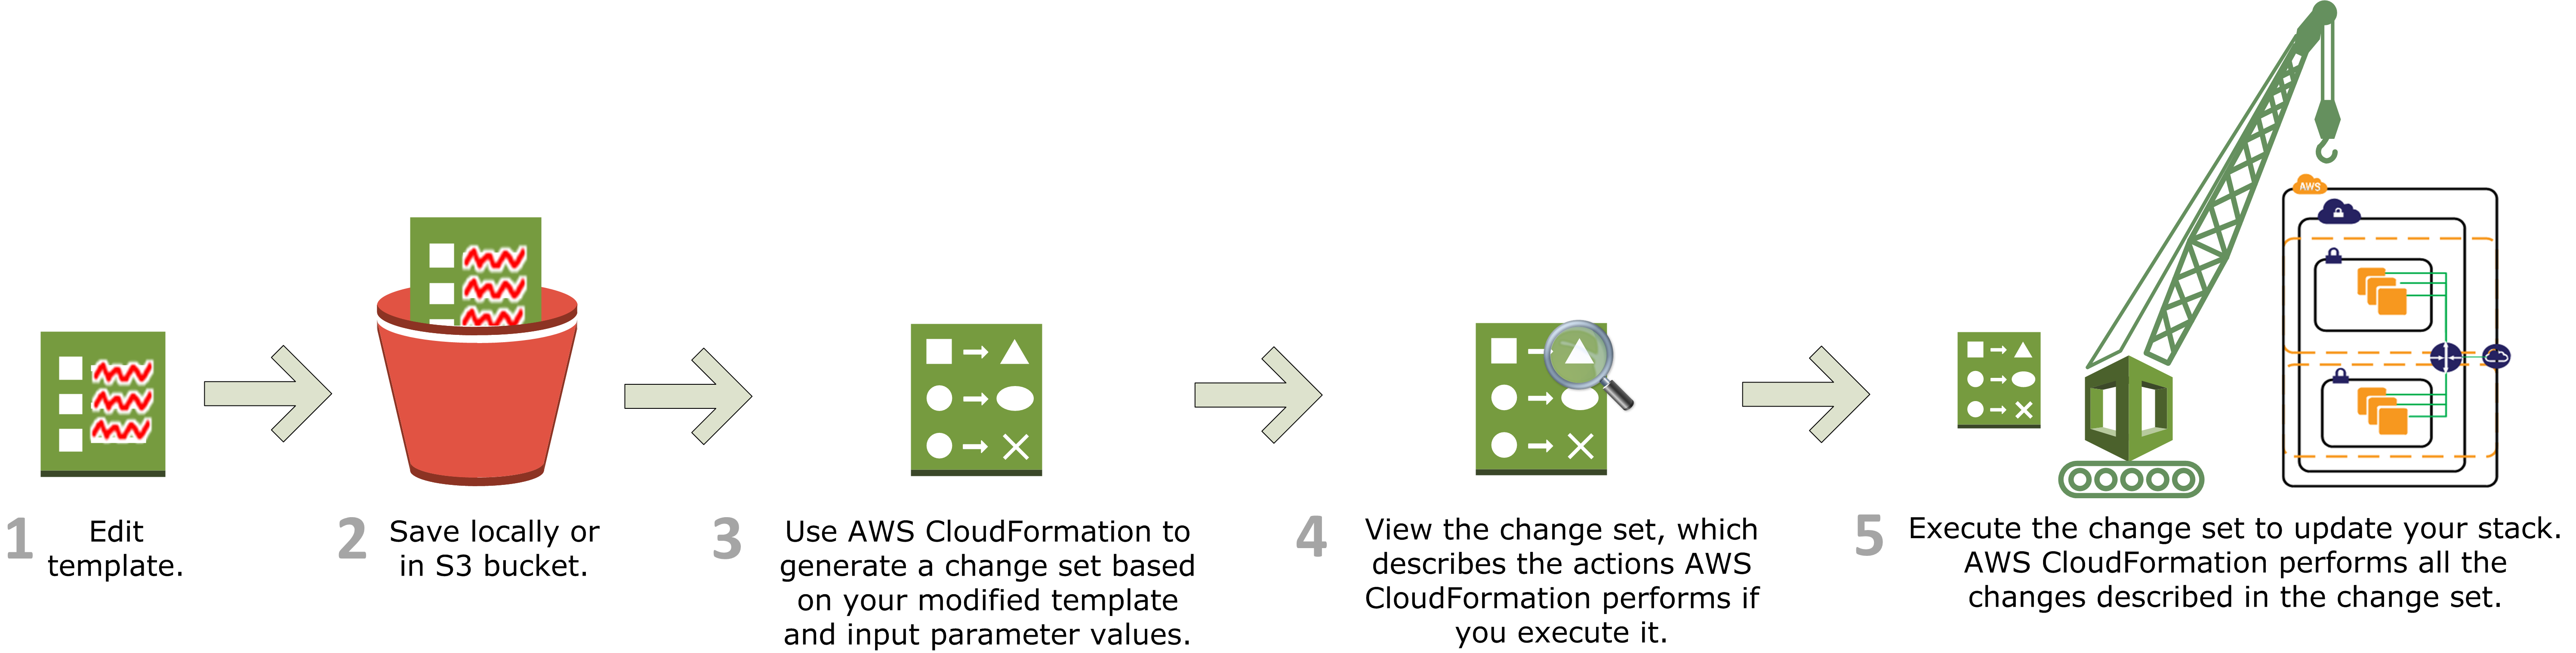 How Does AWS CloudFormation Work? - AWS CloudFormation